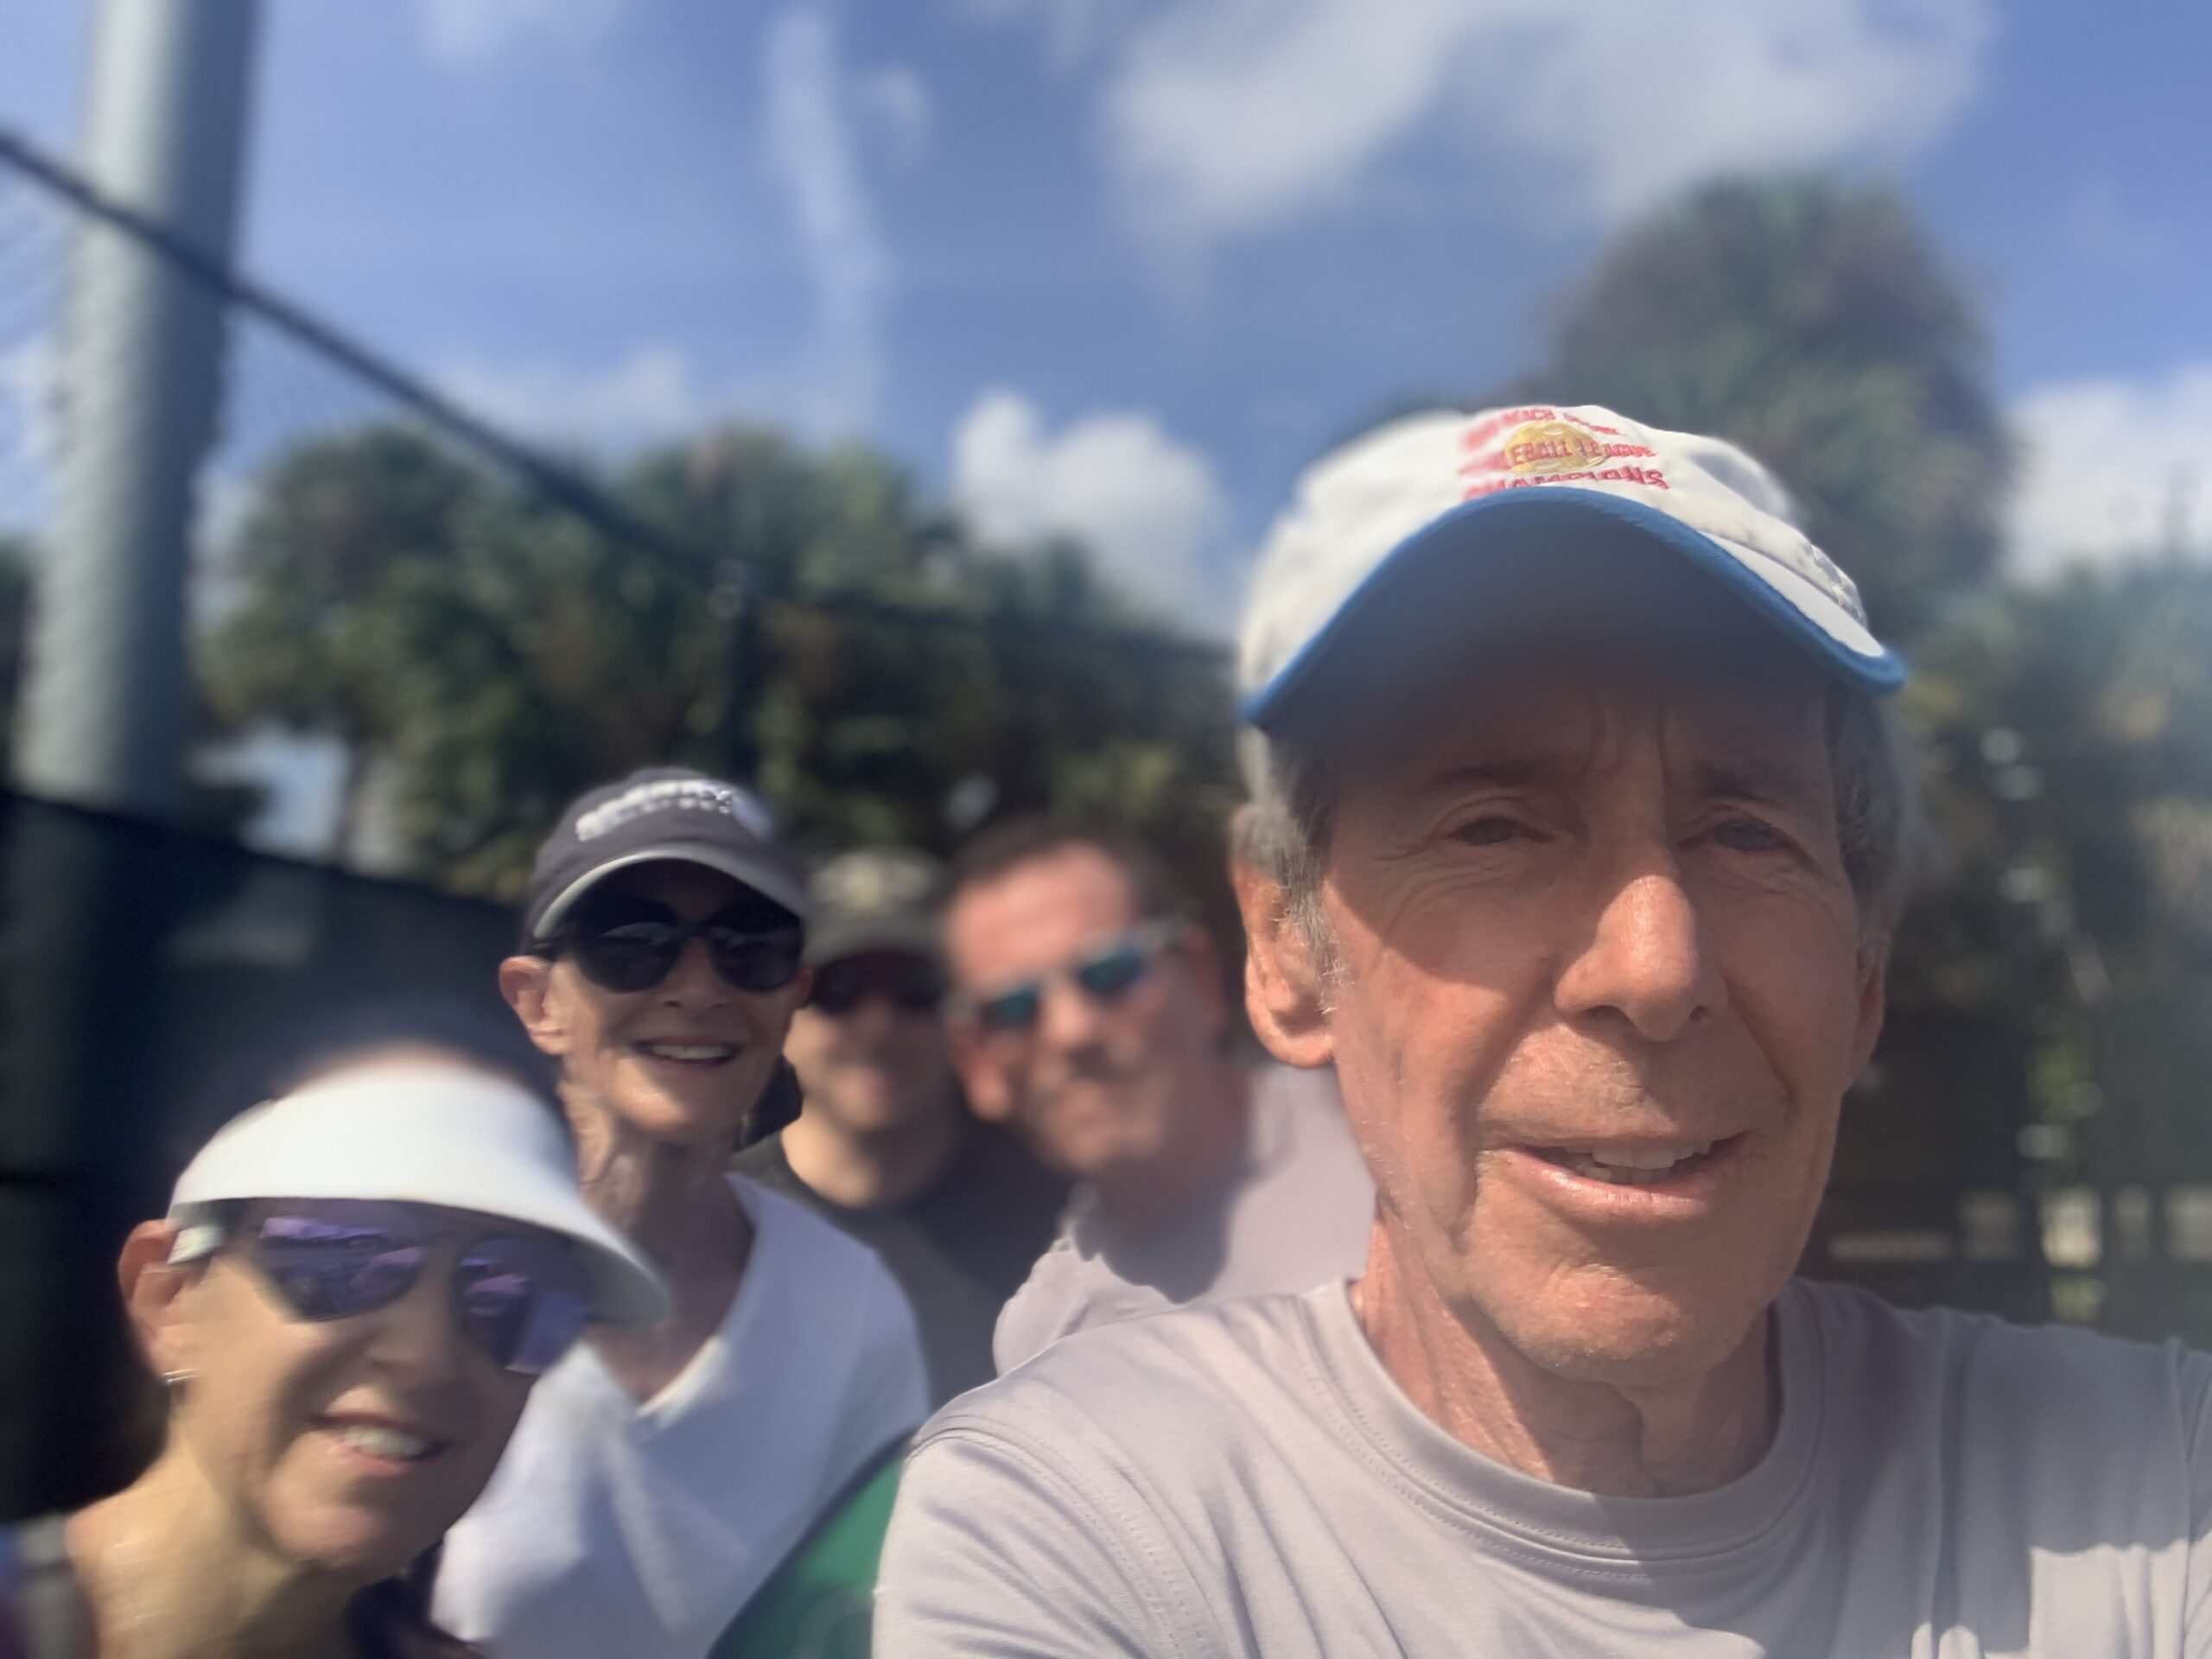 Bob with students Shaina, Jonathan, Rick, and Jane after an intermediate pickleball clinic in Lake Worth, FL. It was mid-day Florida hot, but the lesson went well.